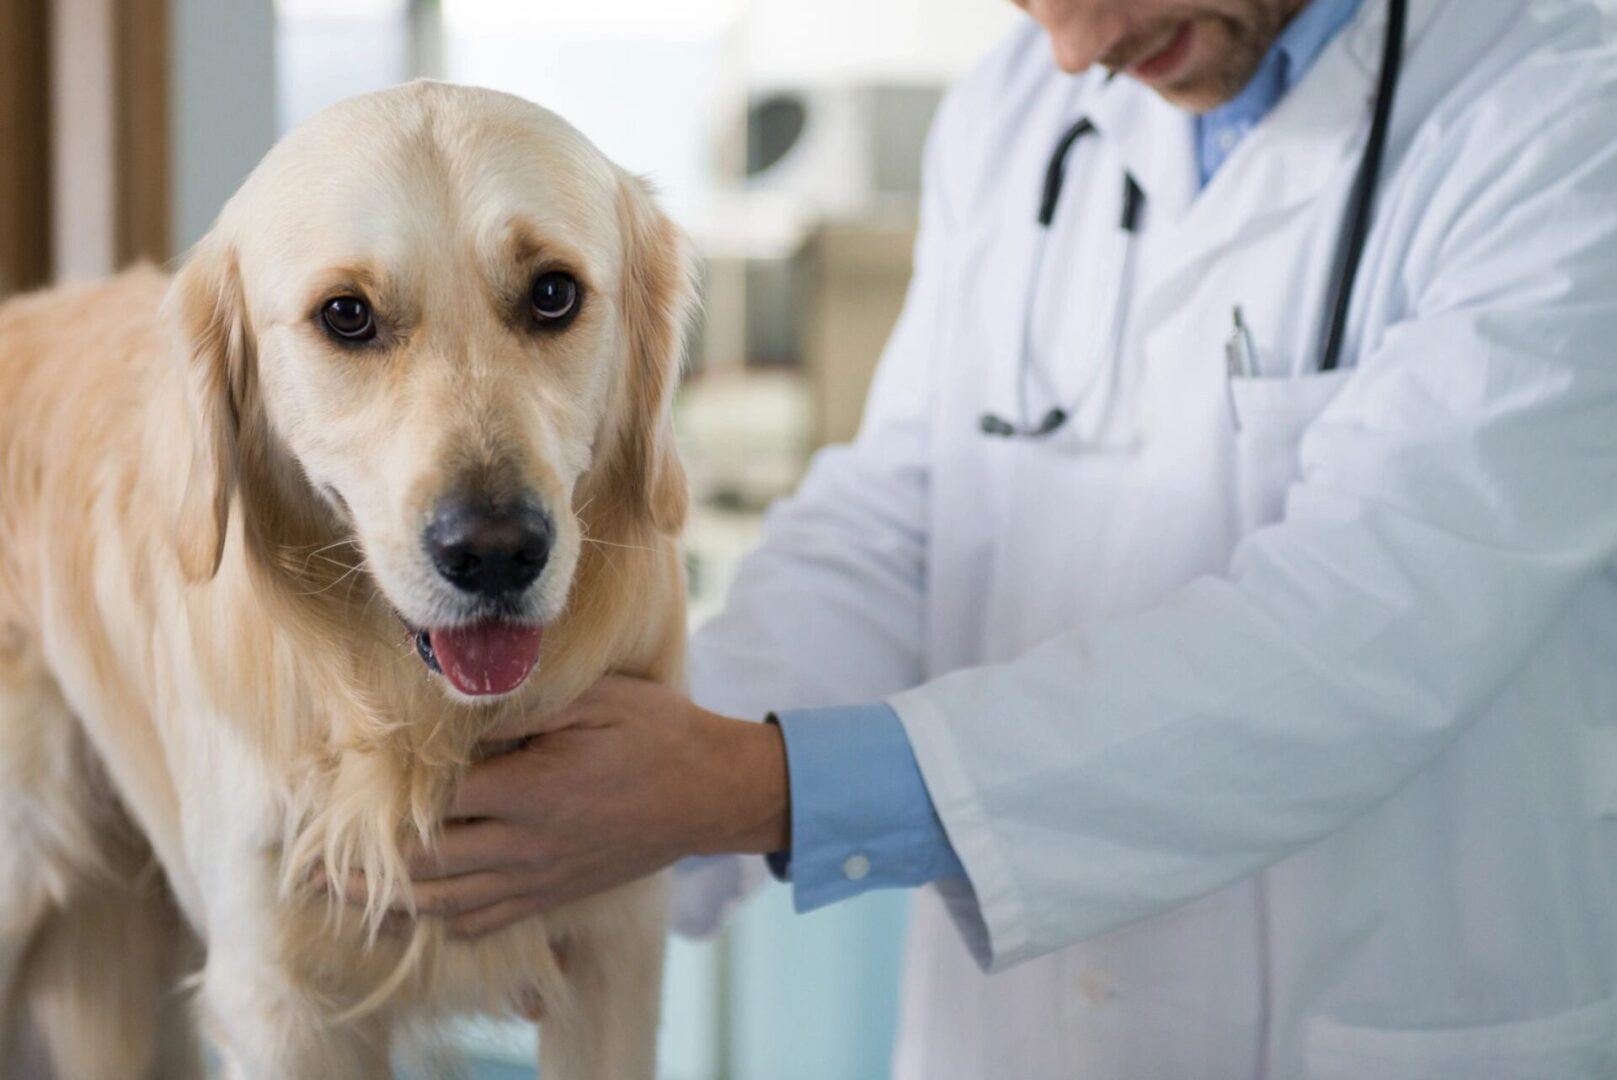 A dog is being examined by a vet.